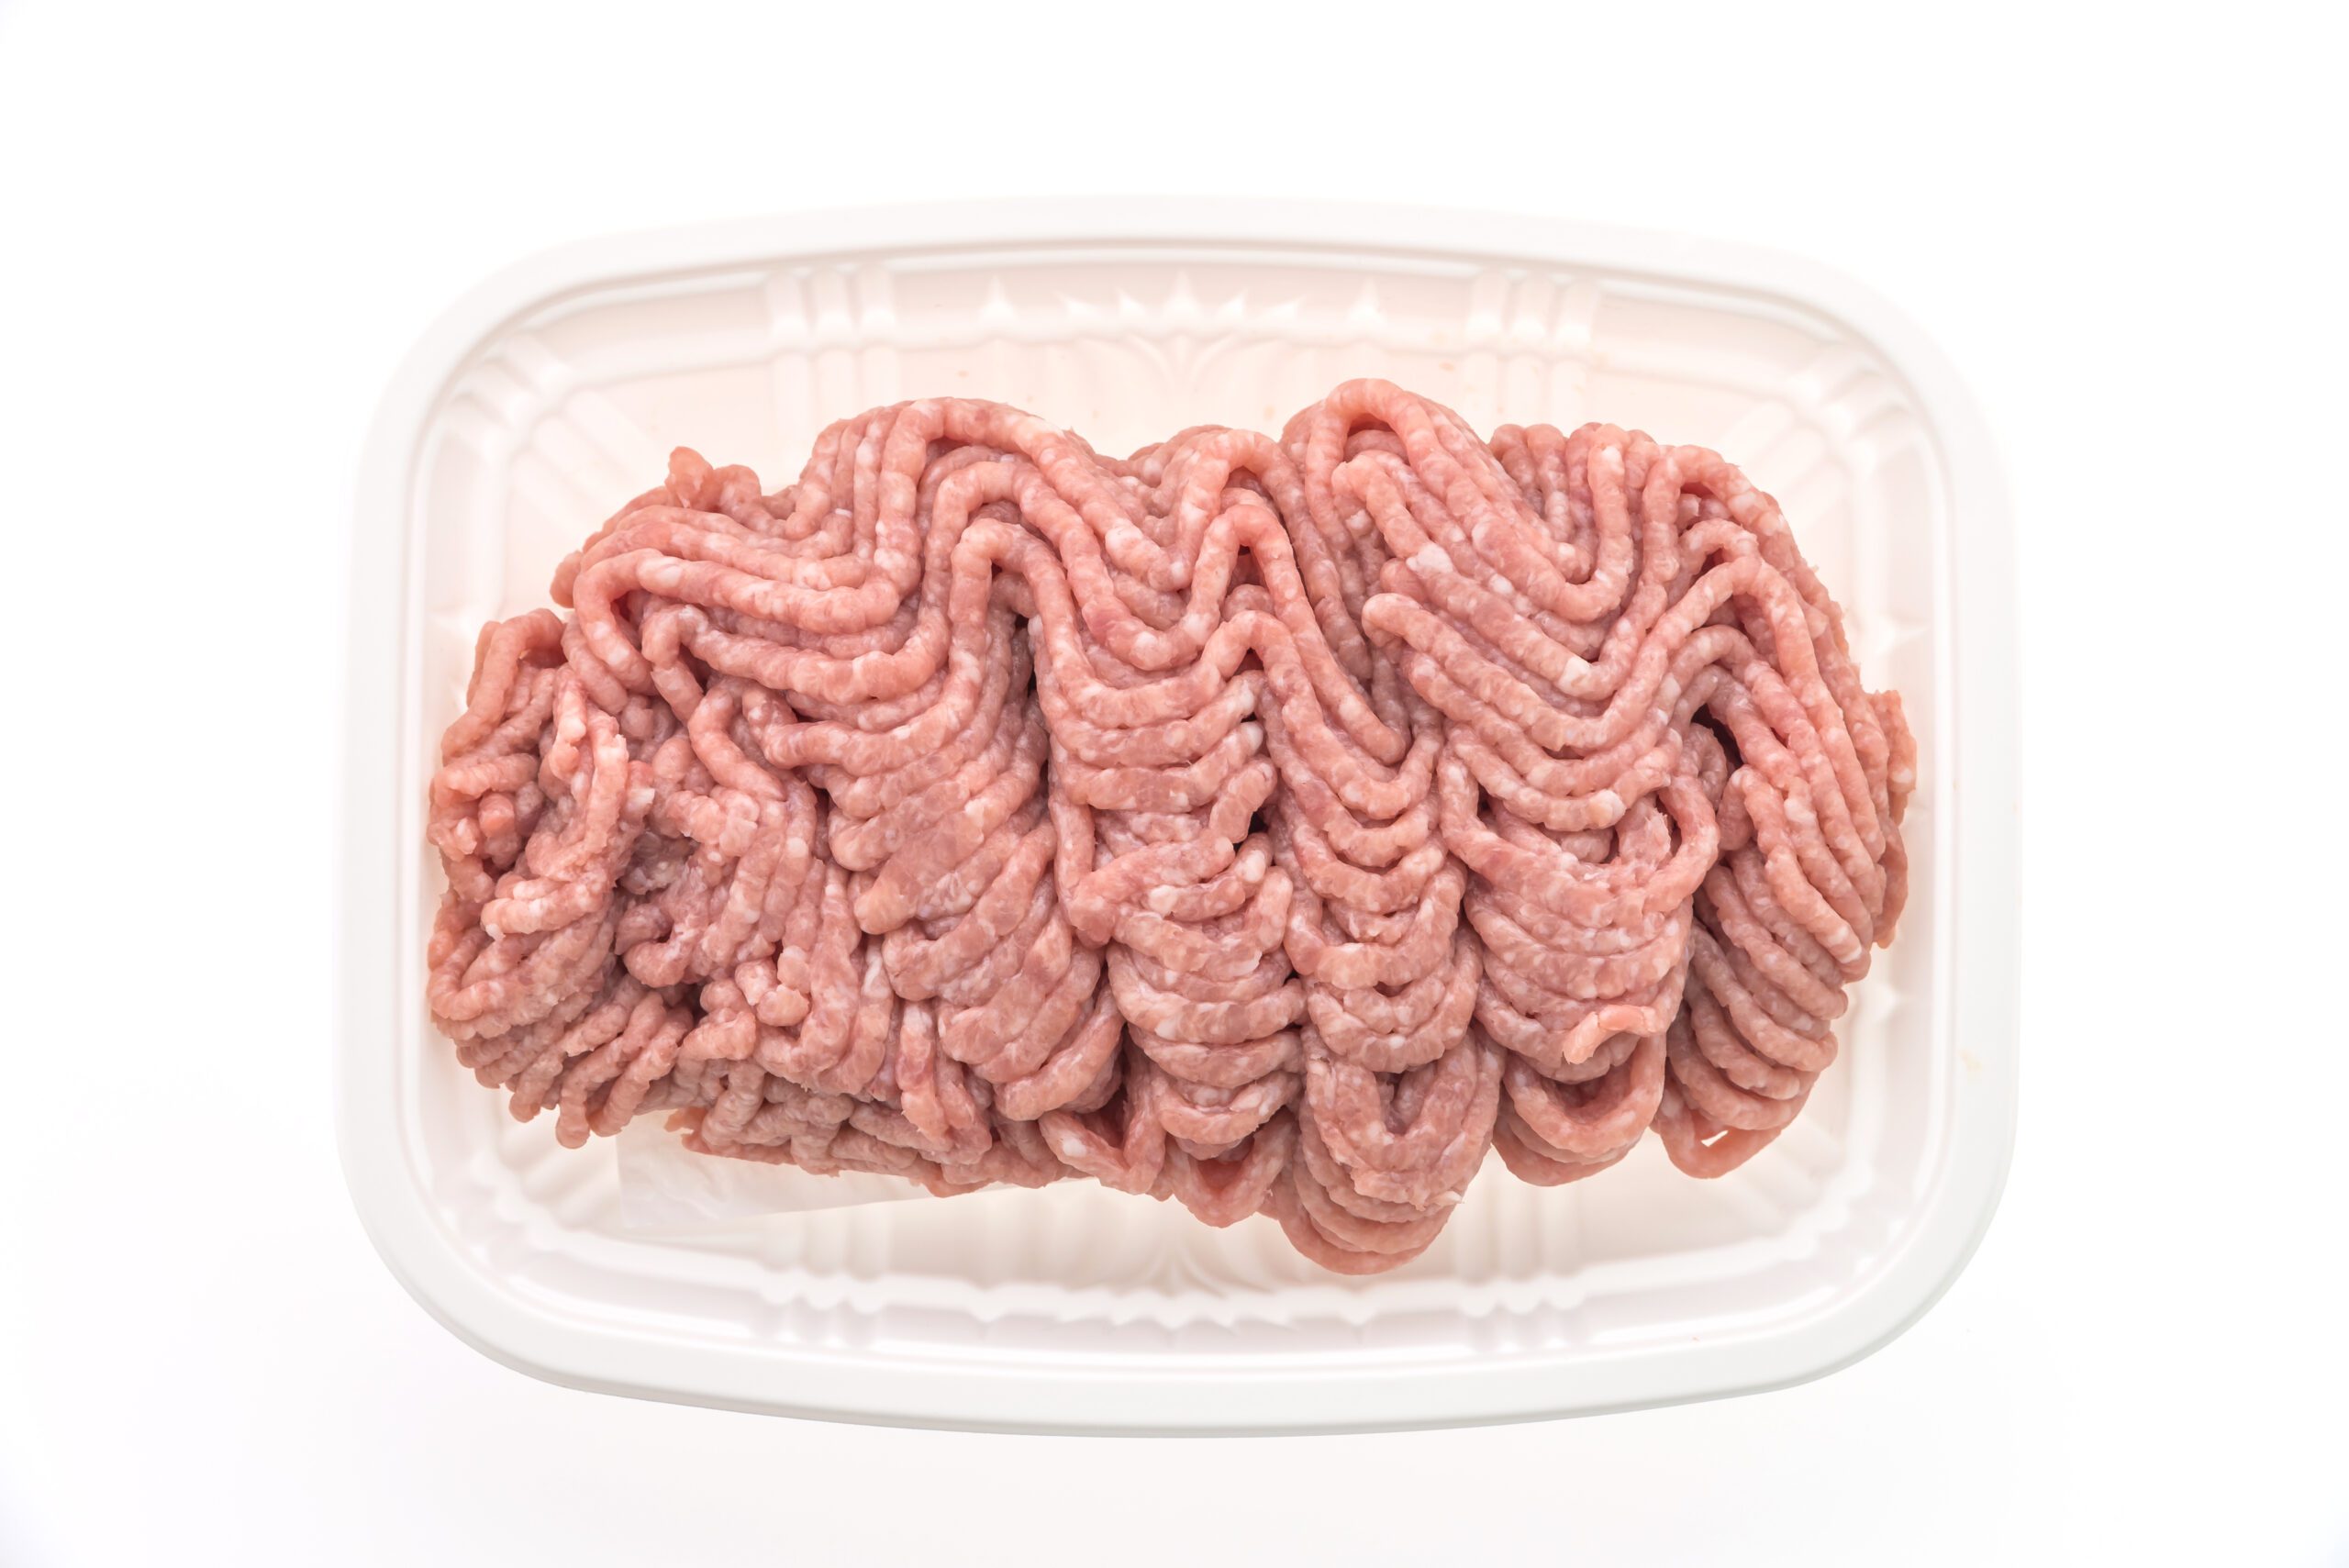 Raw minced pork meat, Image courtesy of Vecteezy